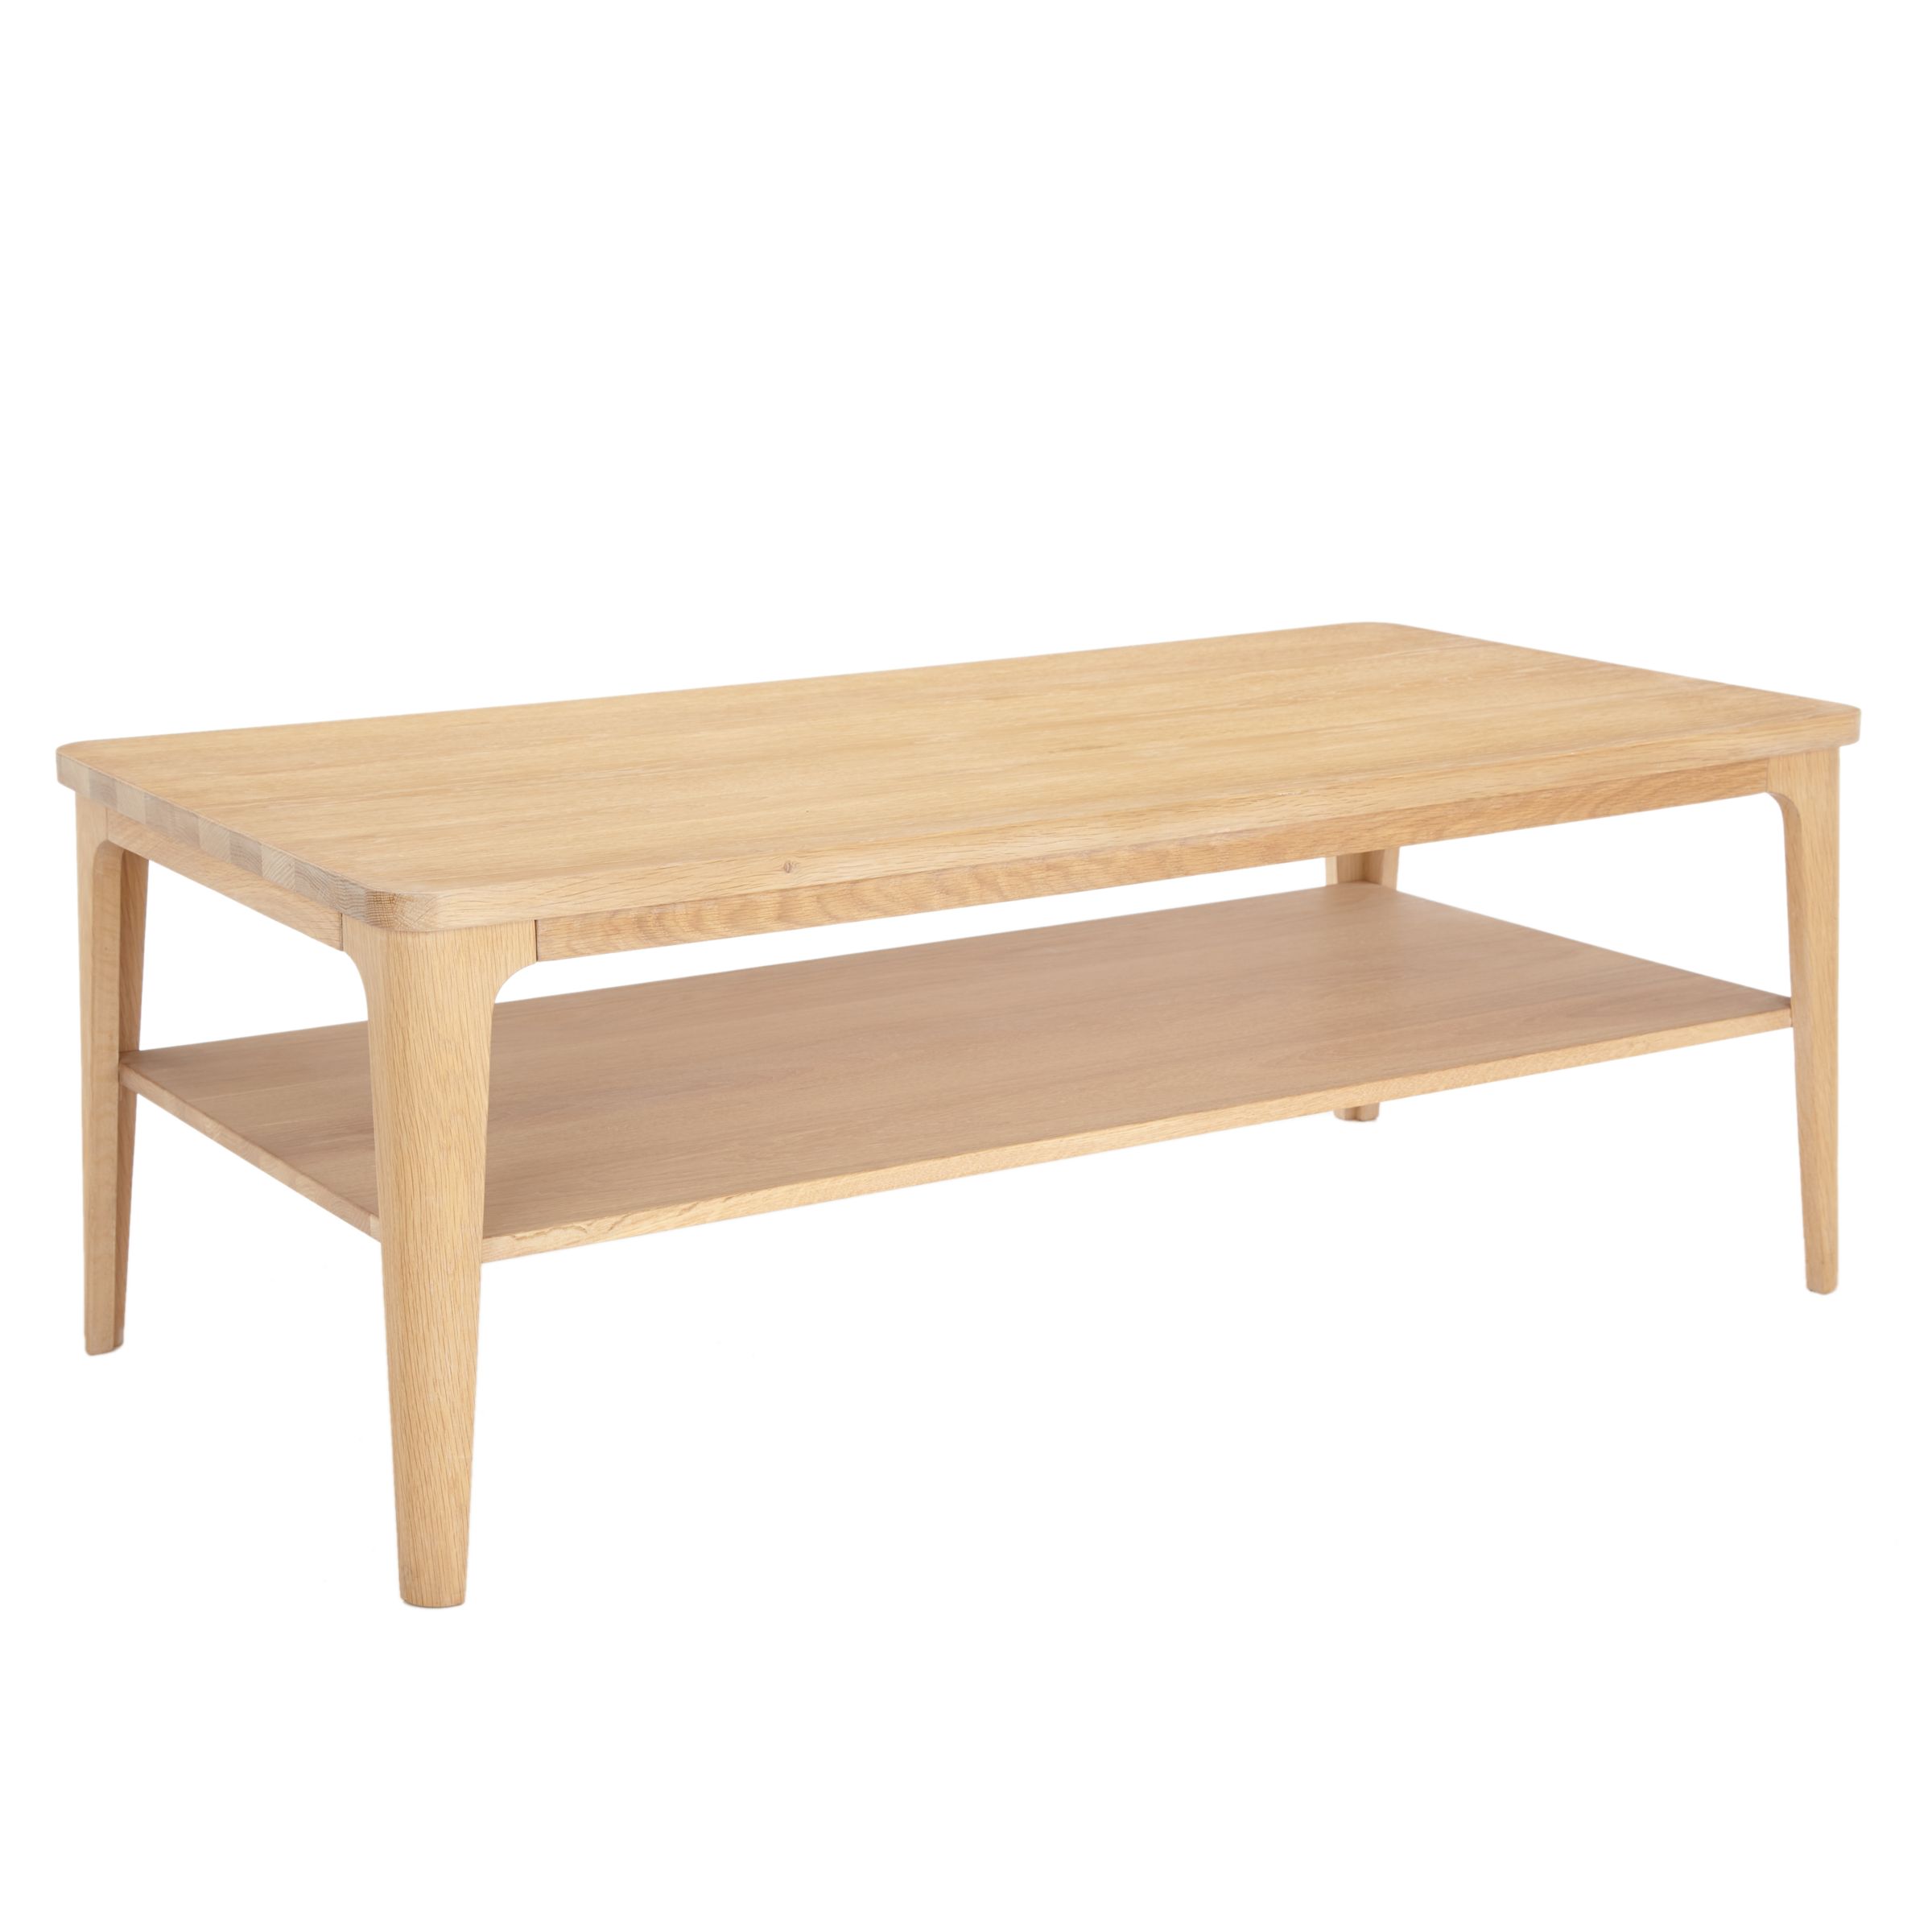 Photo of Ebbe gehl for john lewis mira coffee table